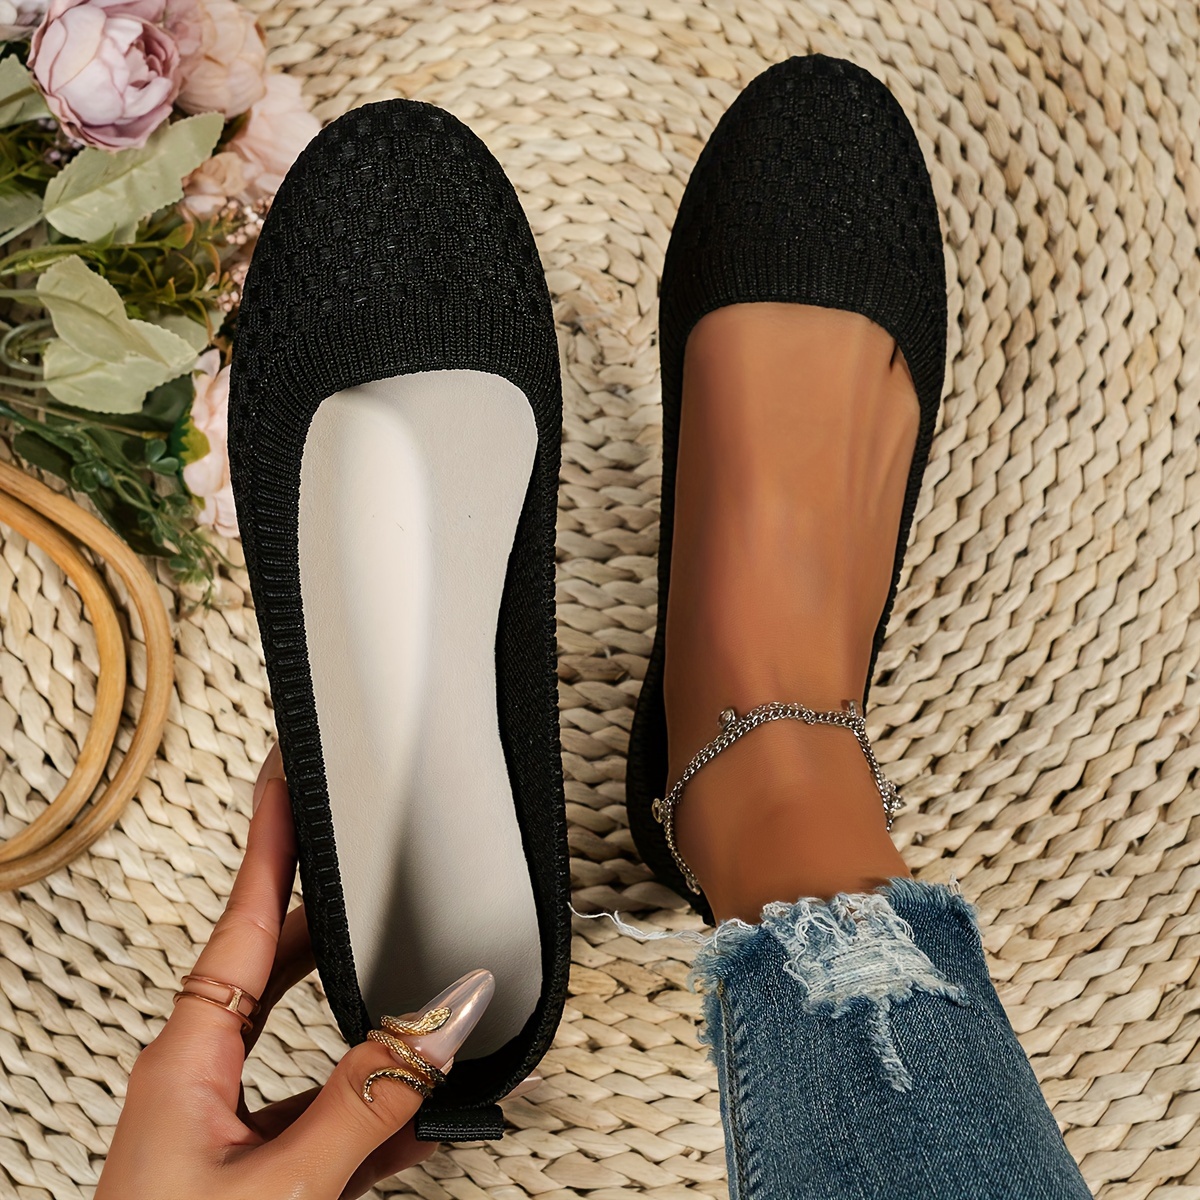 

Women's Knitted Flat Shoes, Solid Color Low Top Slip On Shoes, Comfy Breathable Soft Sole Flats For Casual Wear